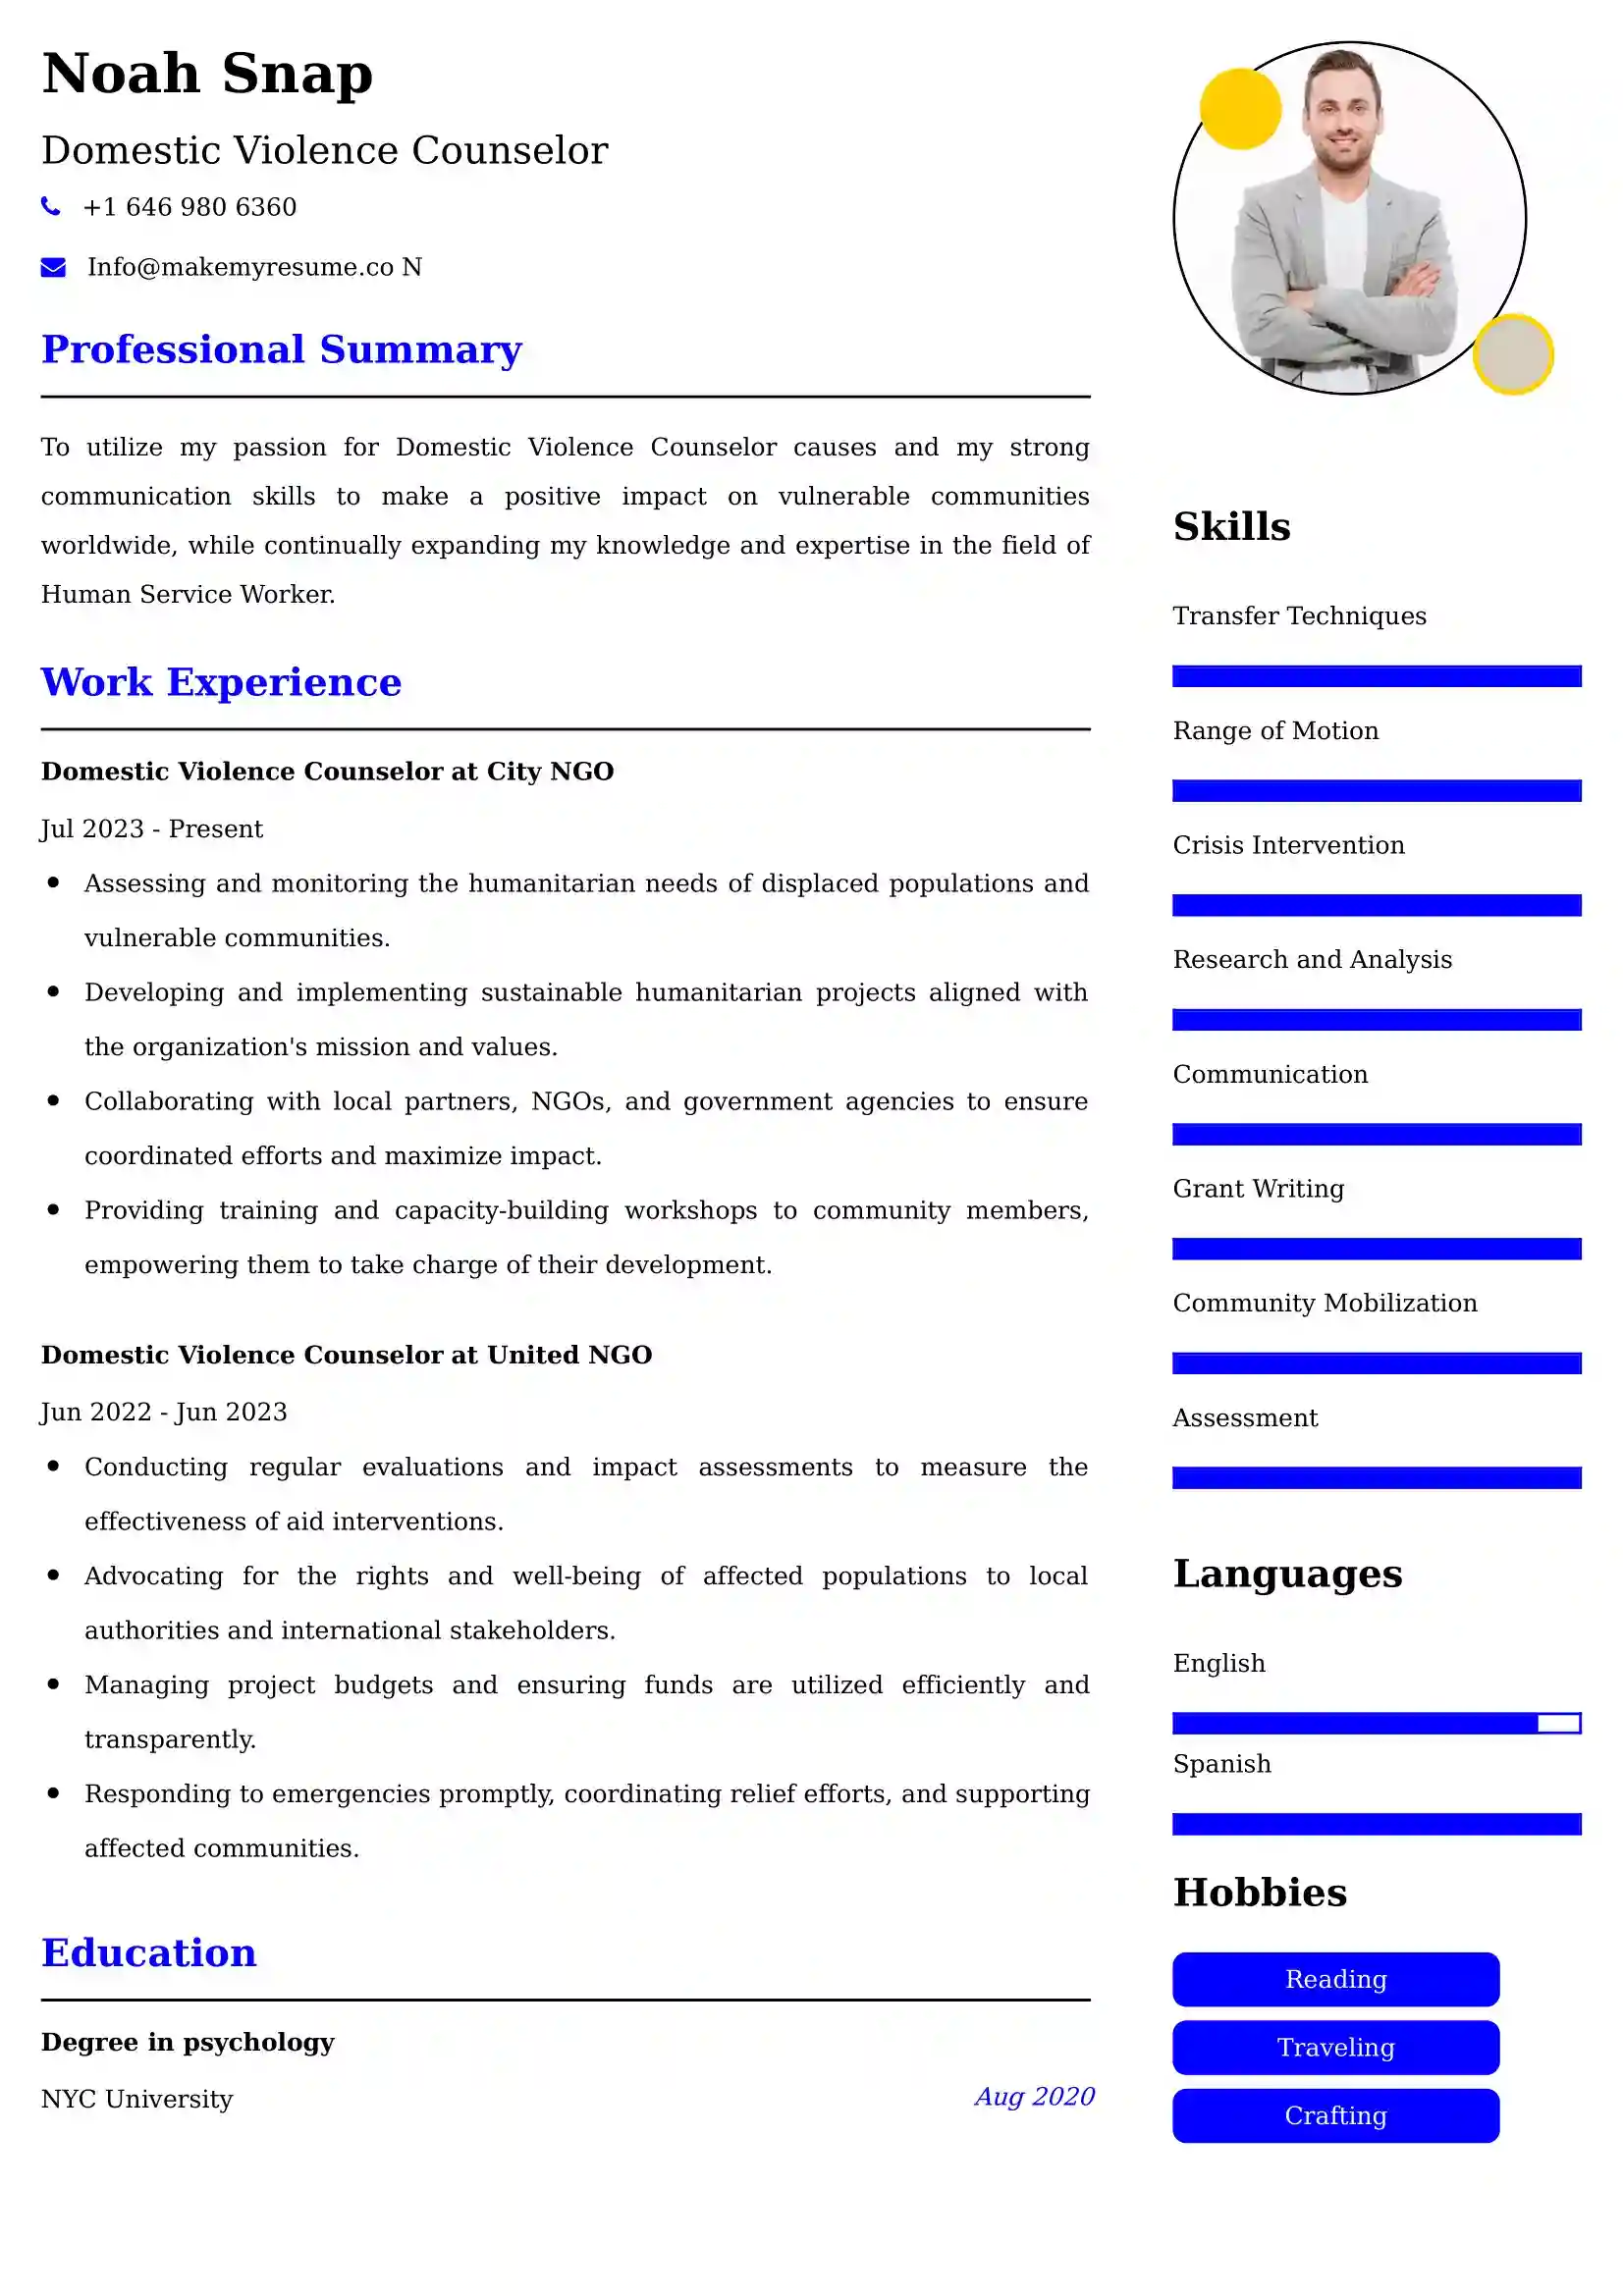 Domestic Violence Counselor Resume Examples - Brazilian Format, Latest Template